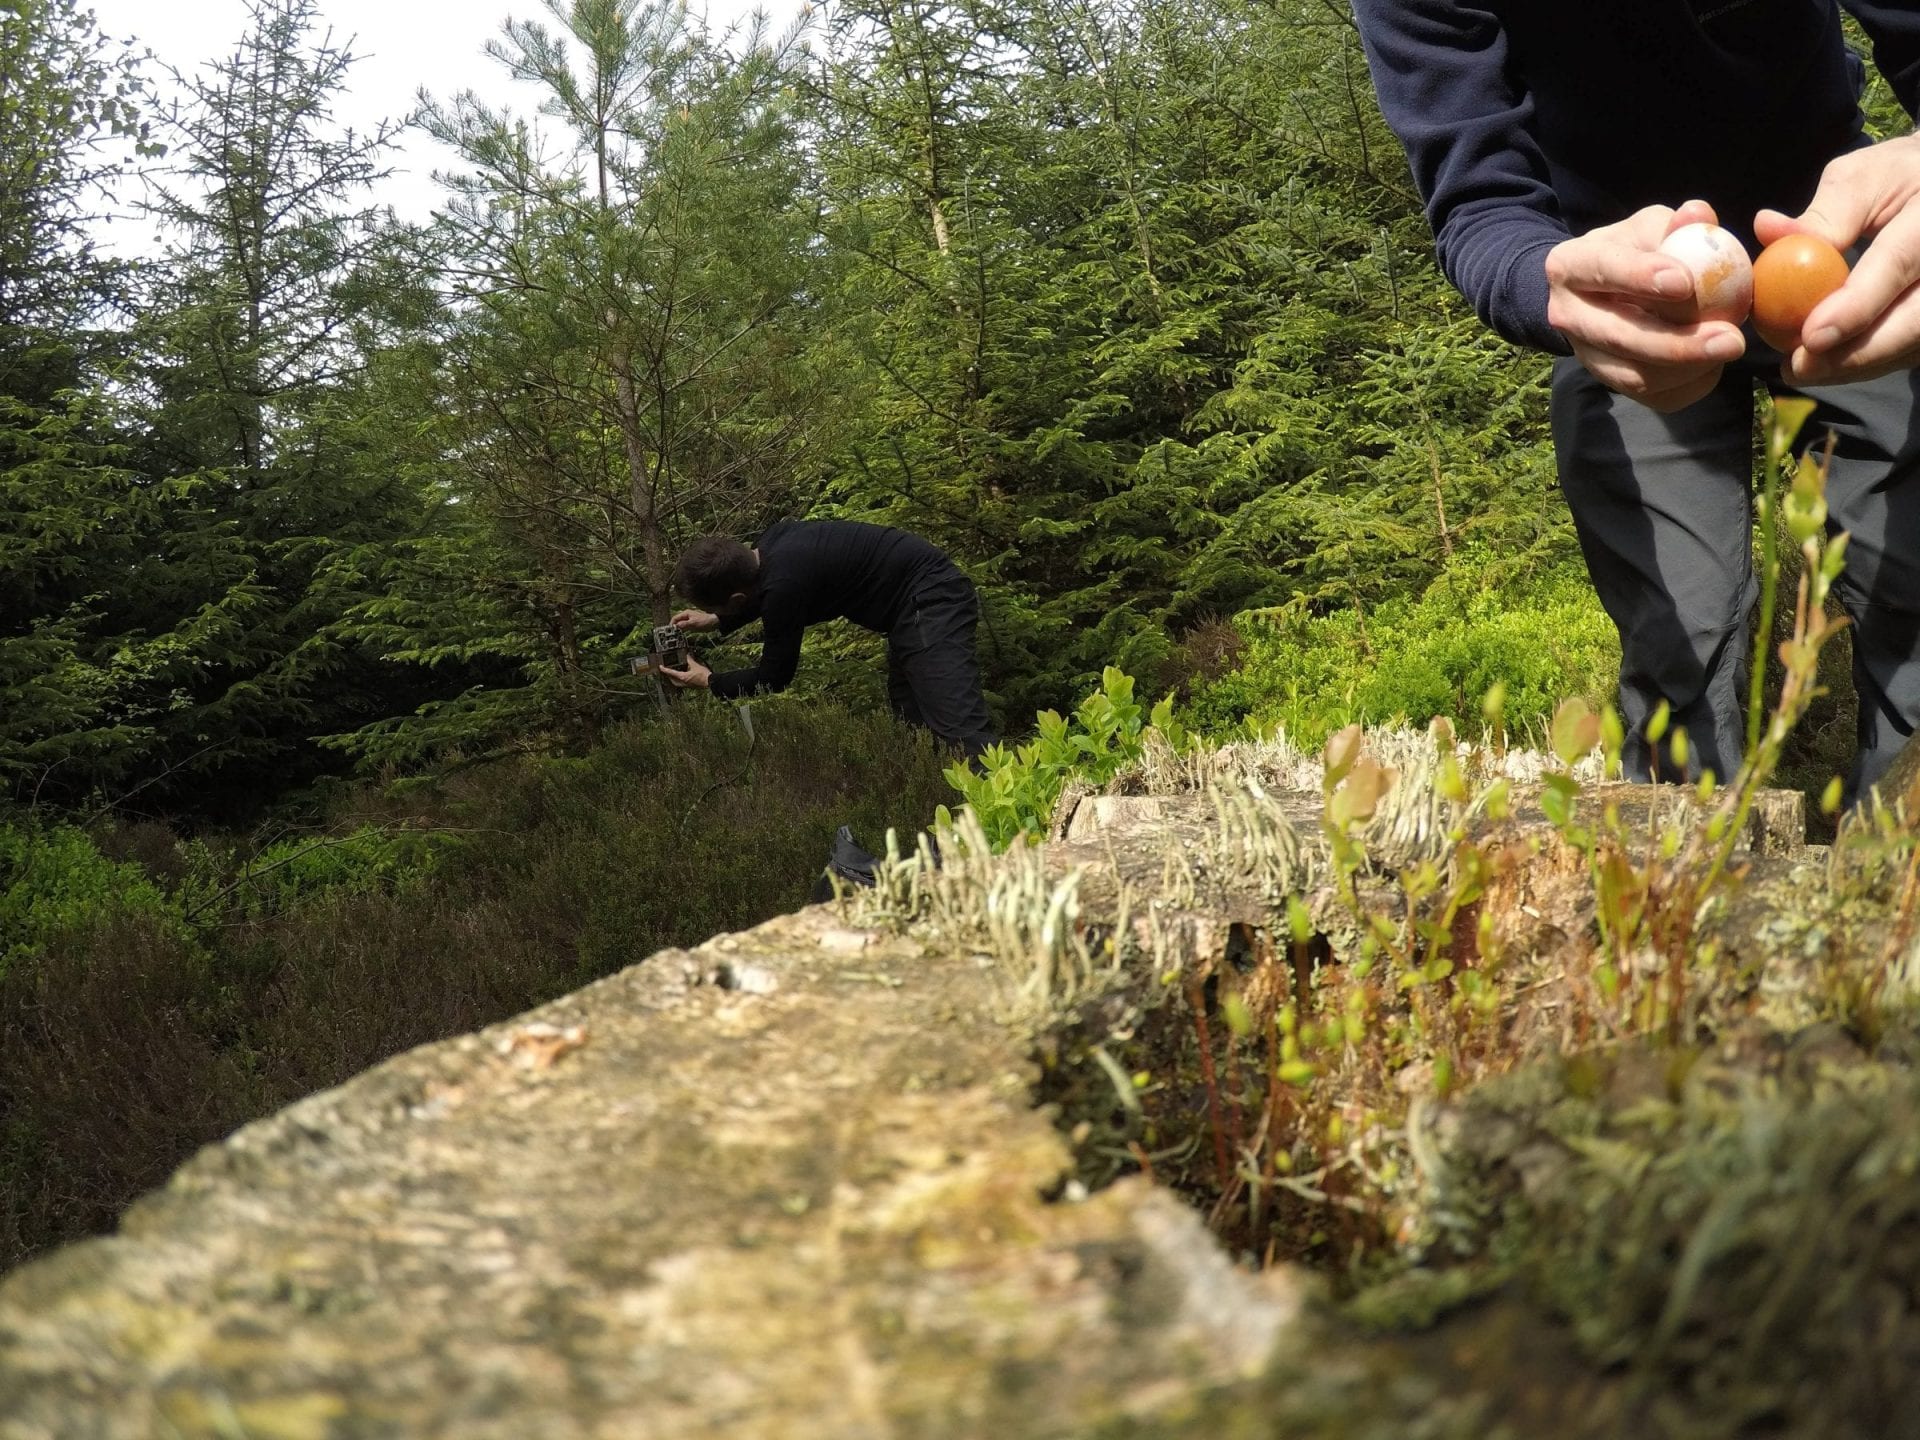 Baiting camera traps for pine marten in Yorkshire